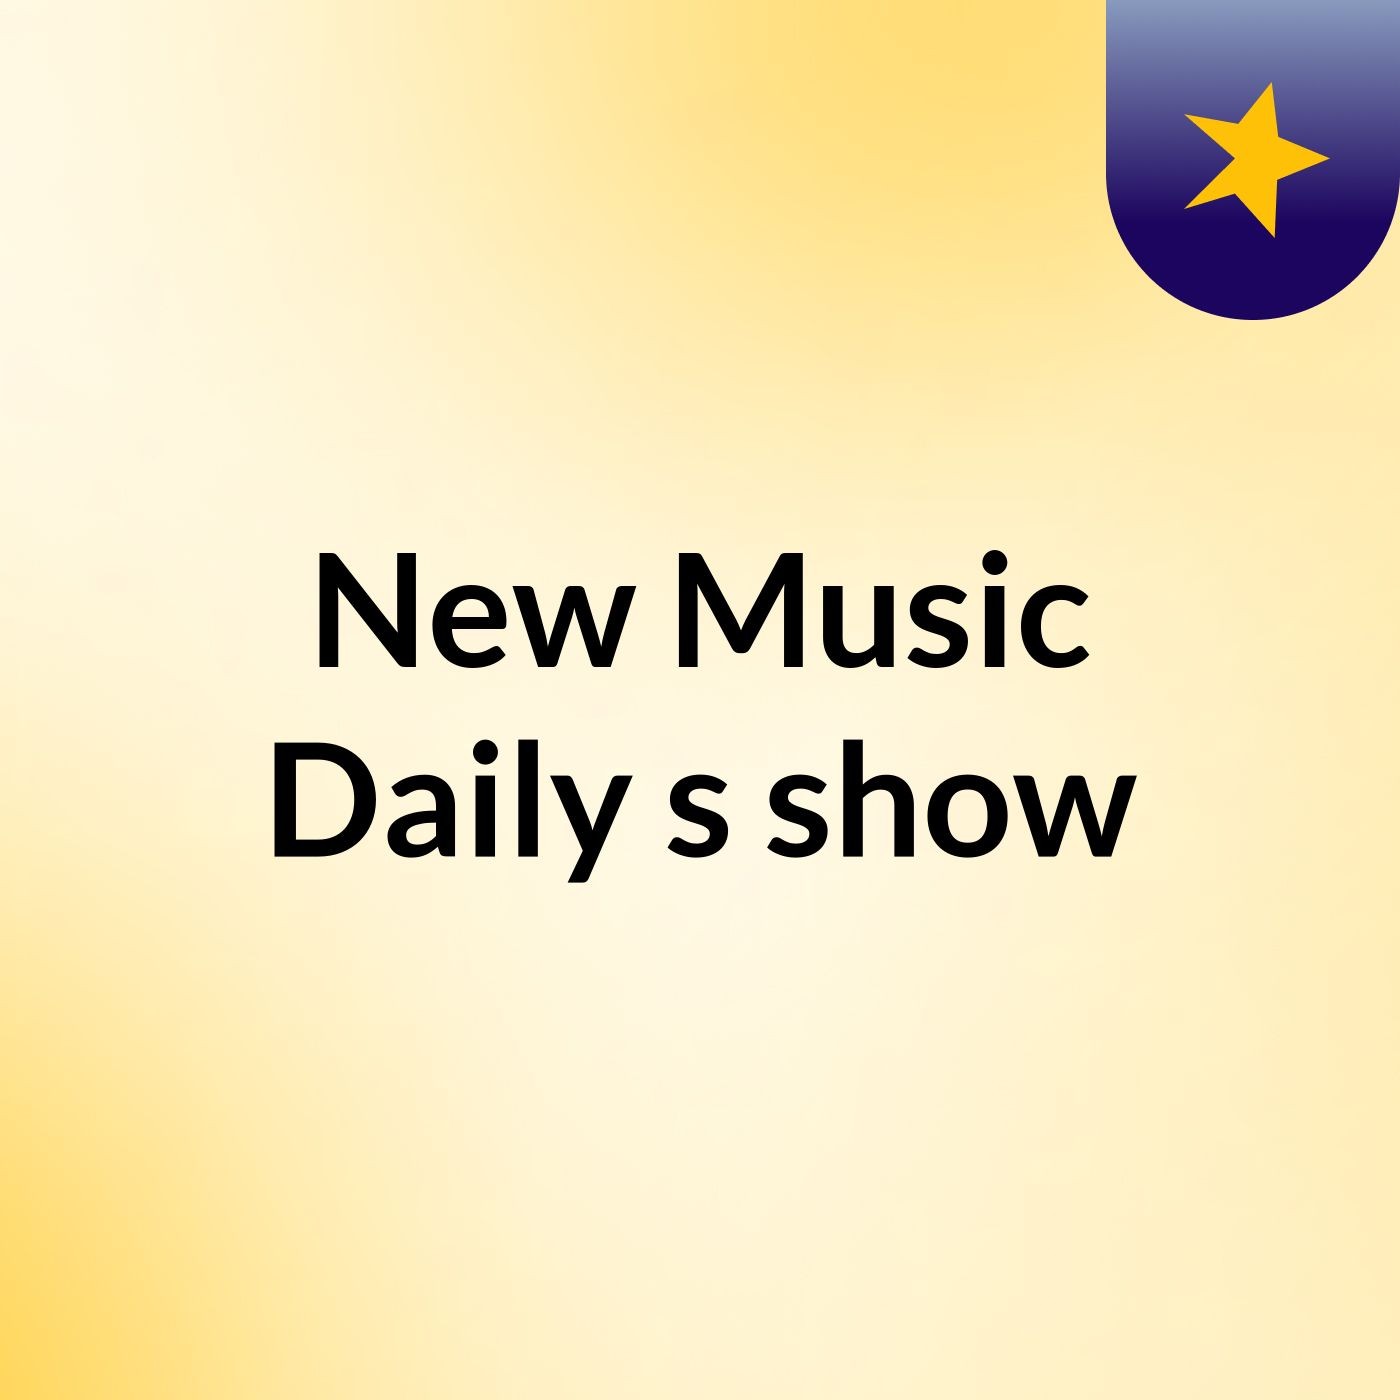 New Music Daily's show